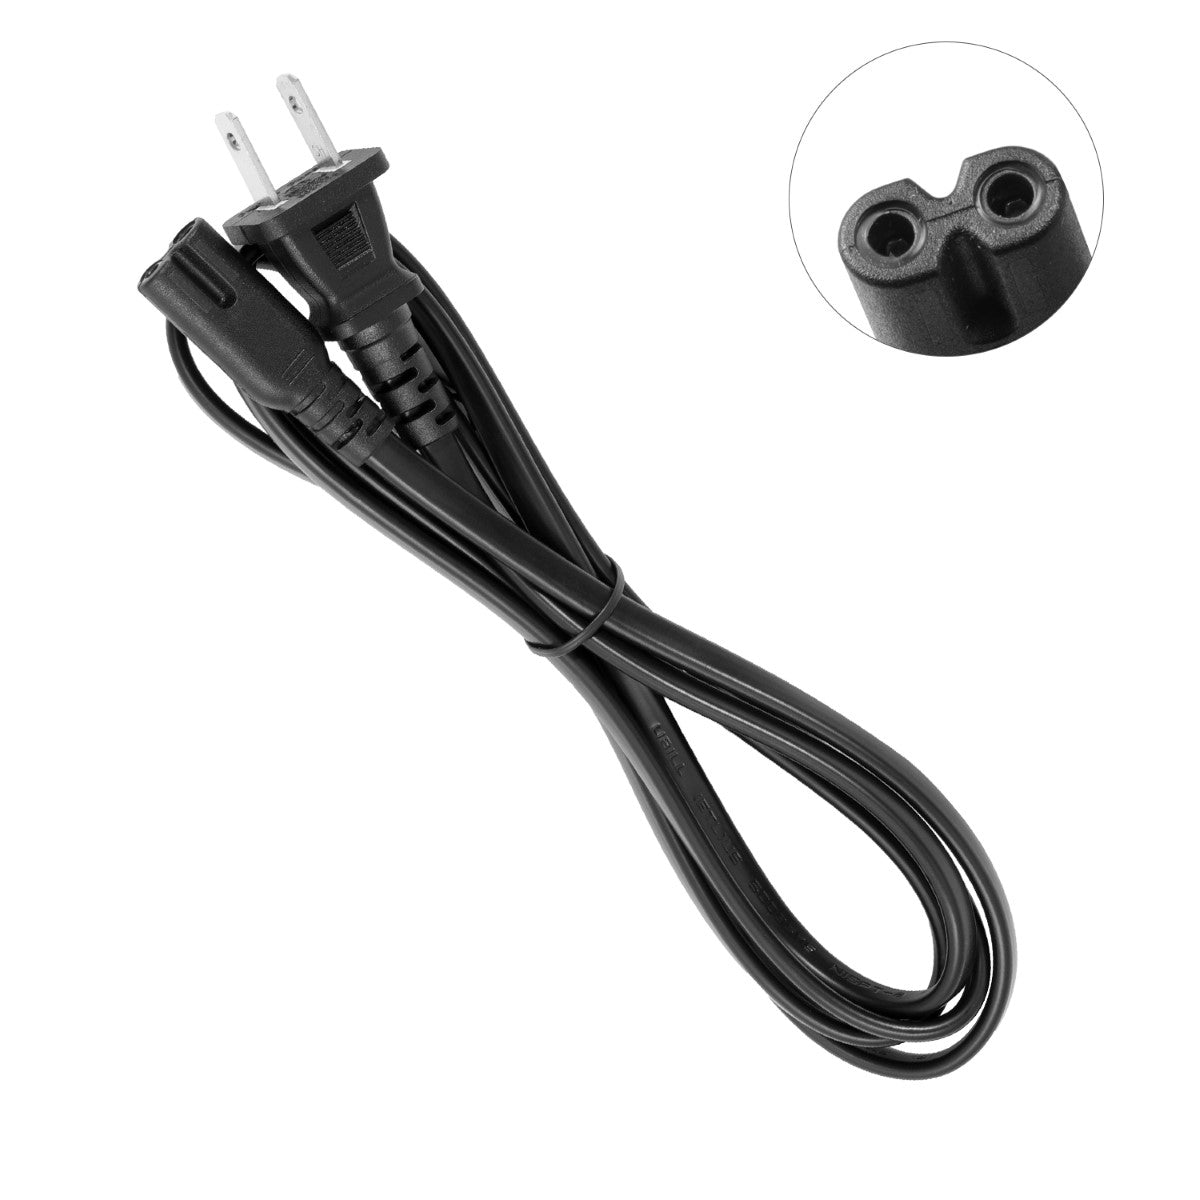 Power Cord for Epson Expression XP-620 Printer.